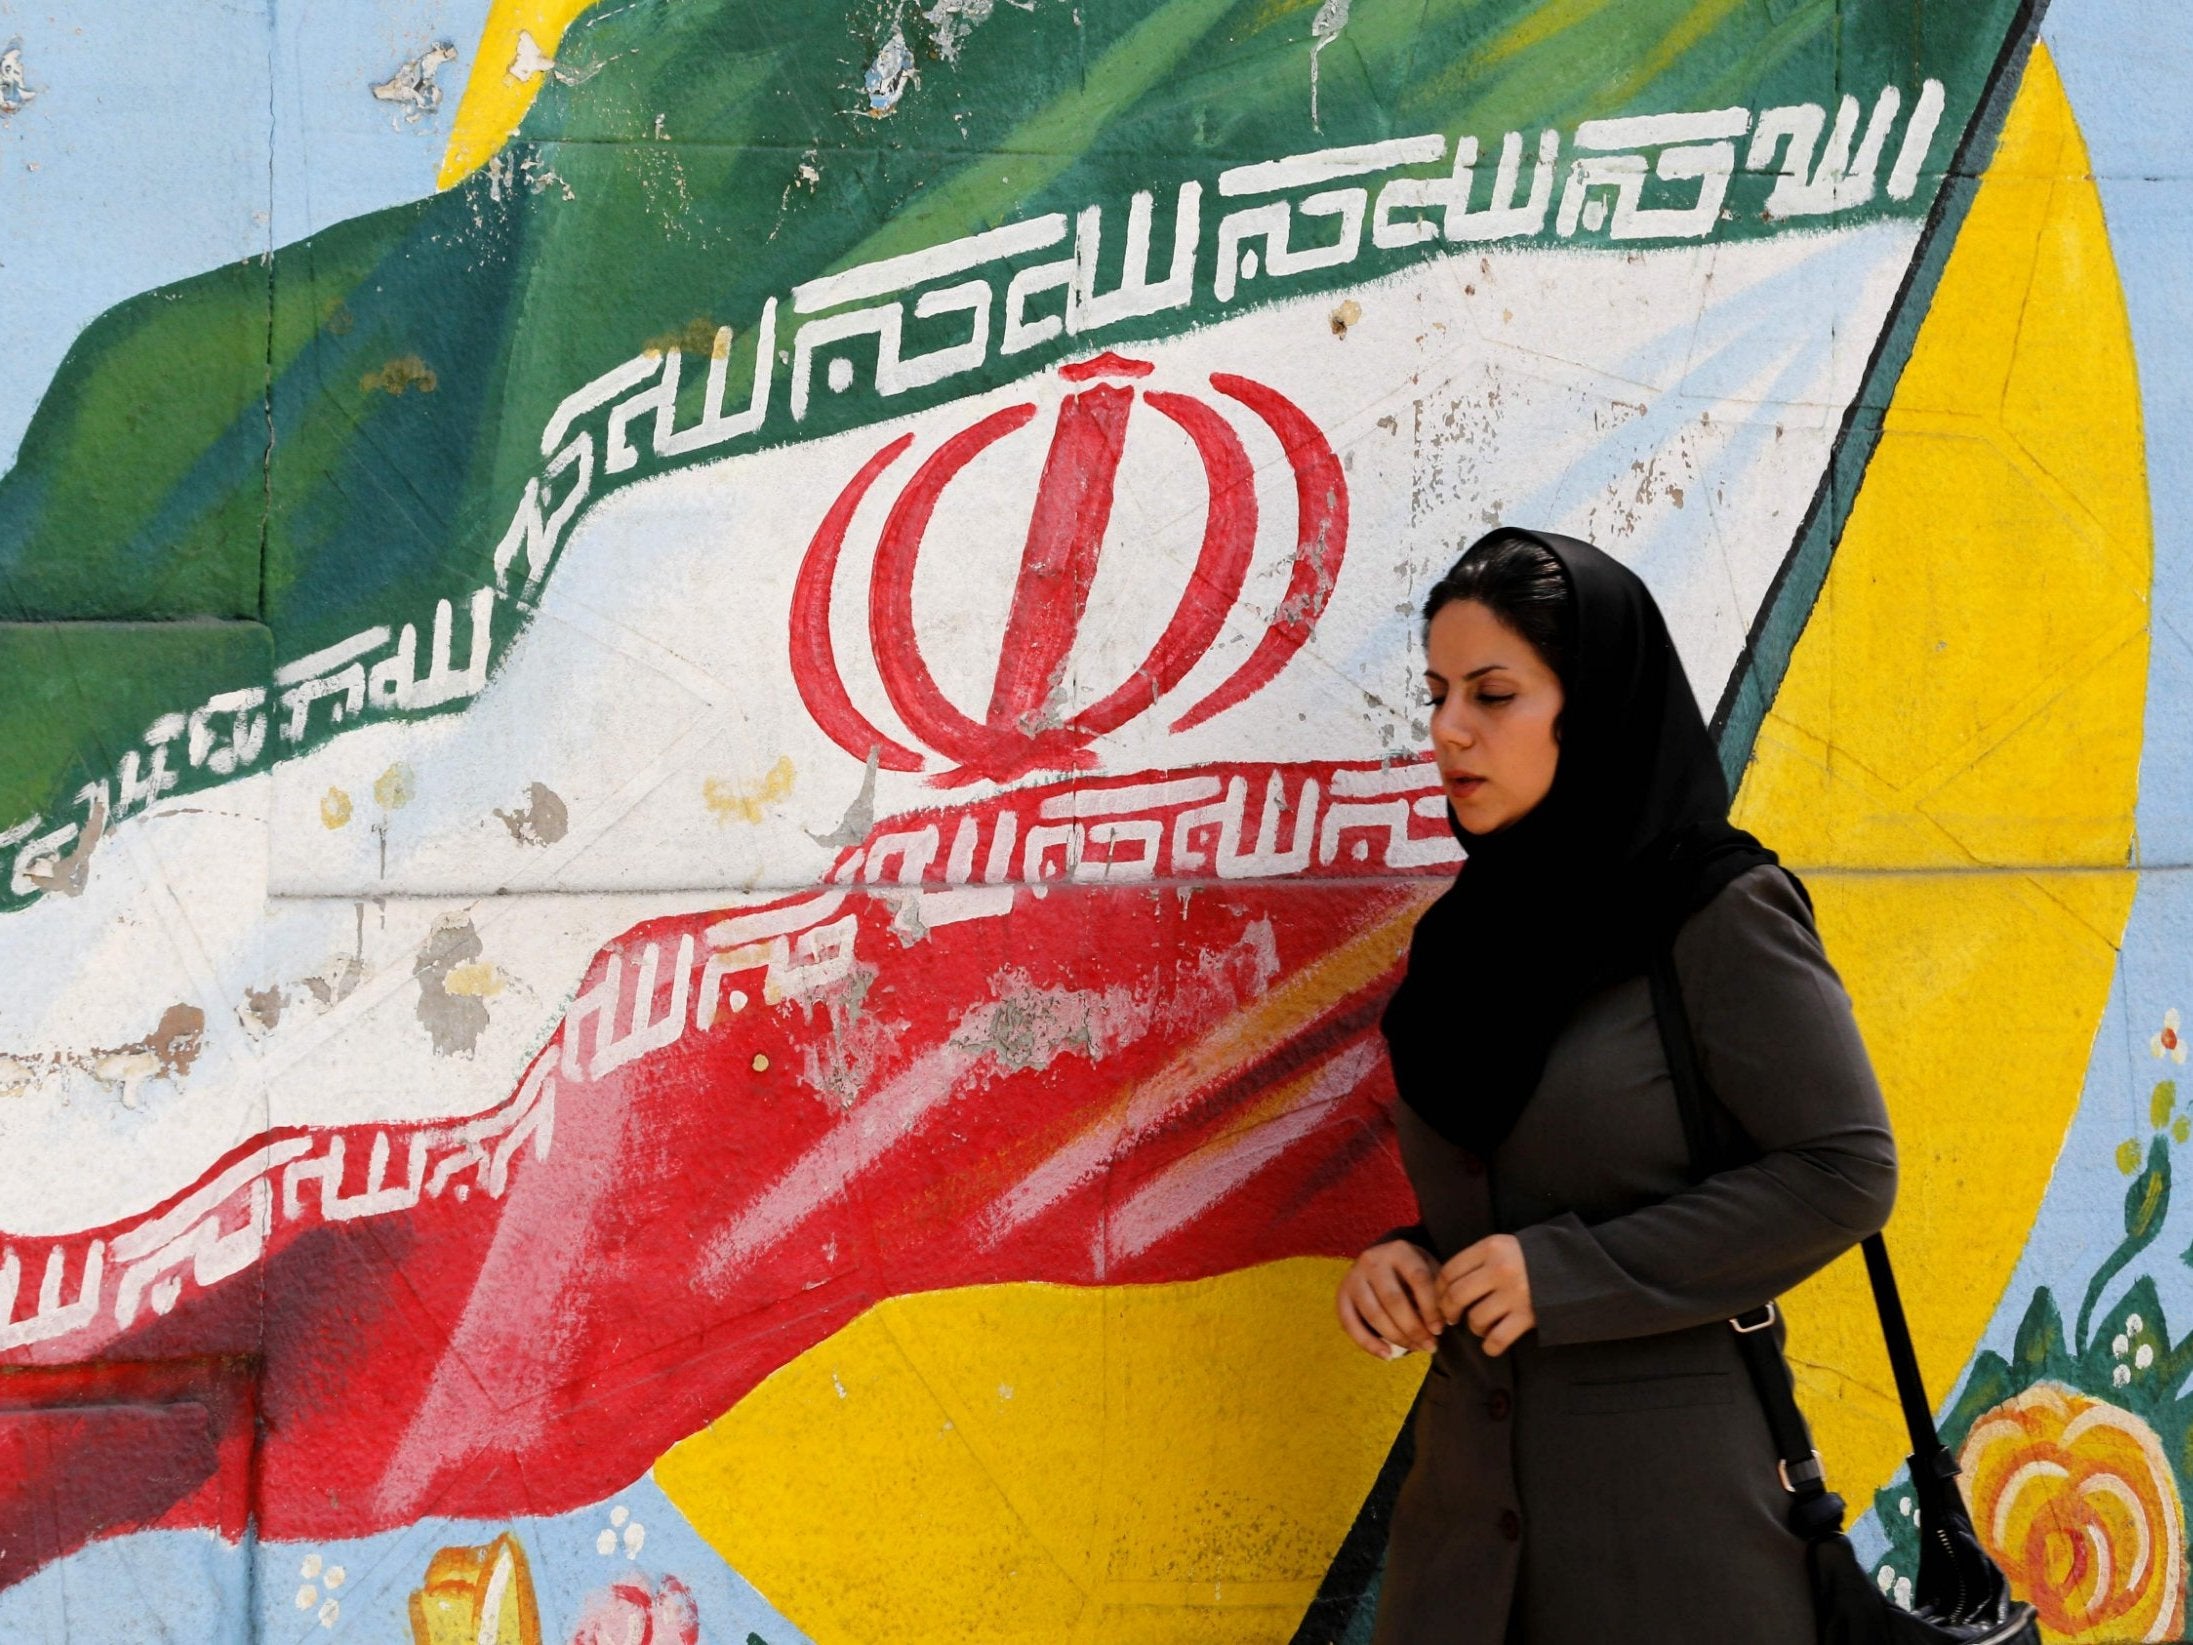 A woman walks in front of a mural painting depicting the Iranian flag, in the capital Tehran on August 6, 2018.